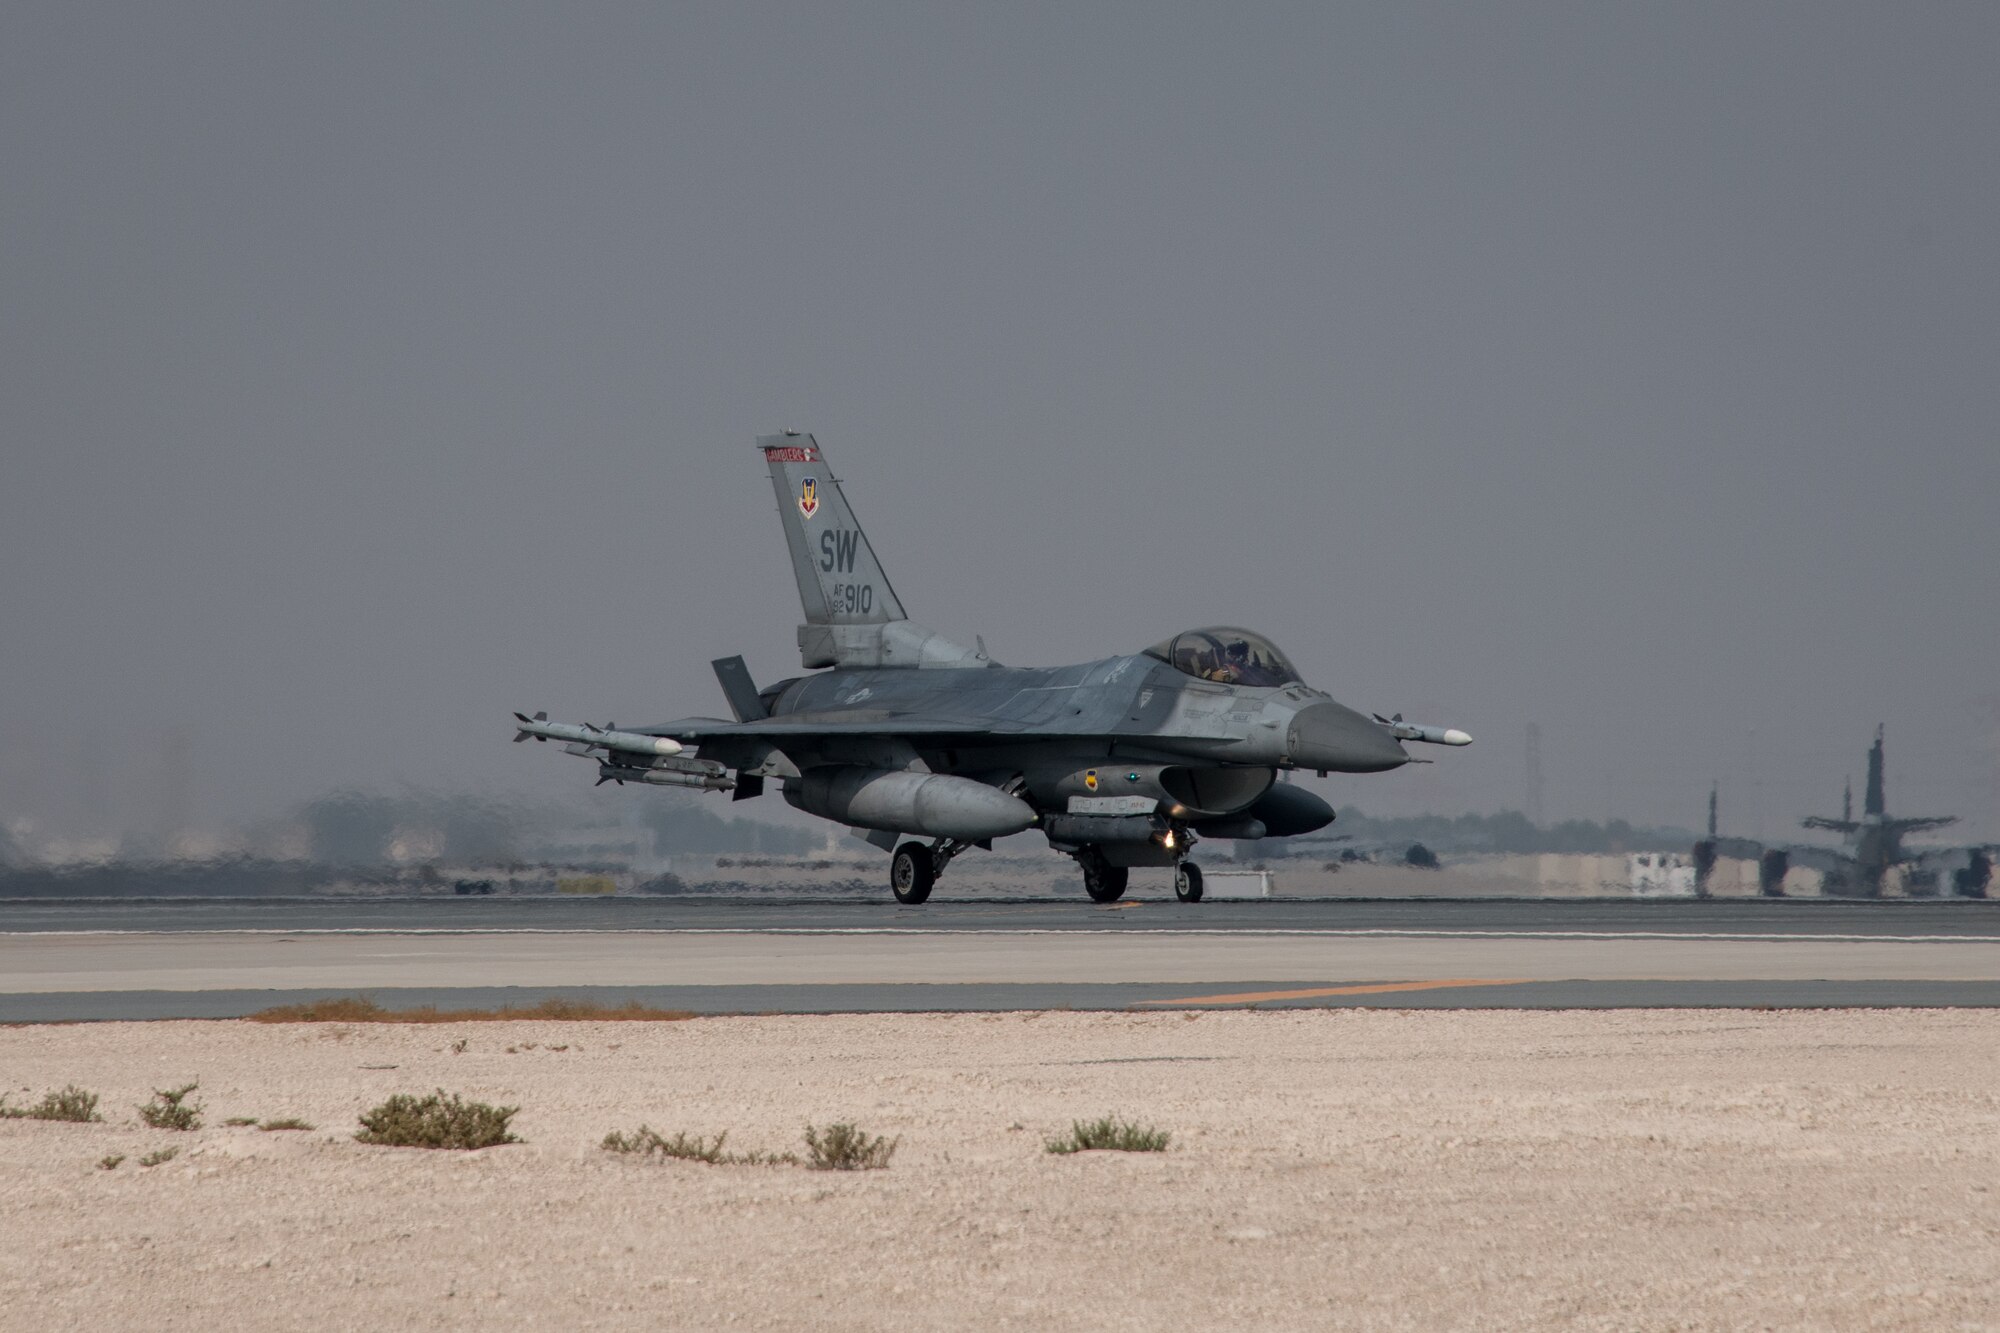 An F-16 Fighting Falcon, assigned to the 77th Expeditionary Fighter Squadron deployed to Prince Sultan Air Base, Kingdom of Saudi Arabia, lands on a runway at Al Udeid Air Base, Qatar, as it heads in for hot pit refueling Nov. 9, 2020. The training qualified deployed Airmen assigned to the 379th Maintenance Group and 379th Expeditionary Logistics Readiness Squadron to perform 24-hour hot pit refueling operations on multiple aircraft that rotate through AUAB. Hot refueling allows aircrew to land and keep their aircraft engines running while they refuel, before taking off to continue the next leg of their respective missions. (U.S. Air National Guard photo by Tech. Sgt. Brigette Waltermire)